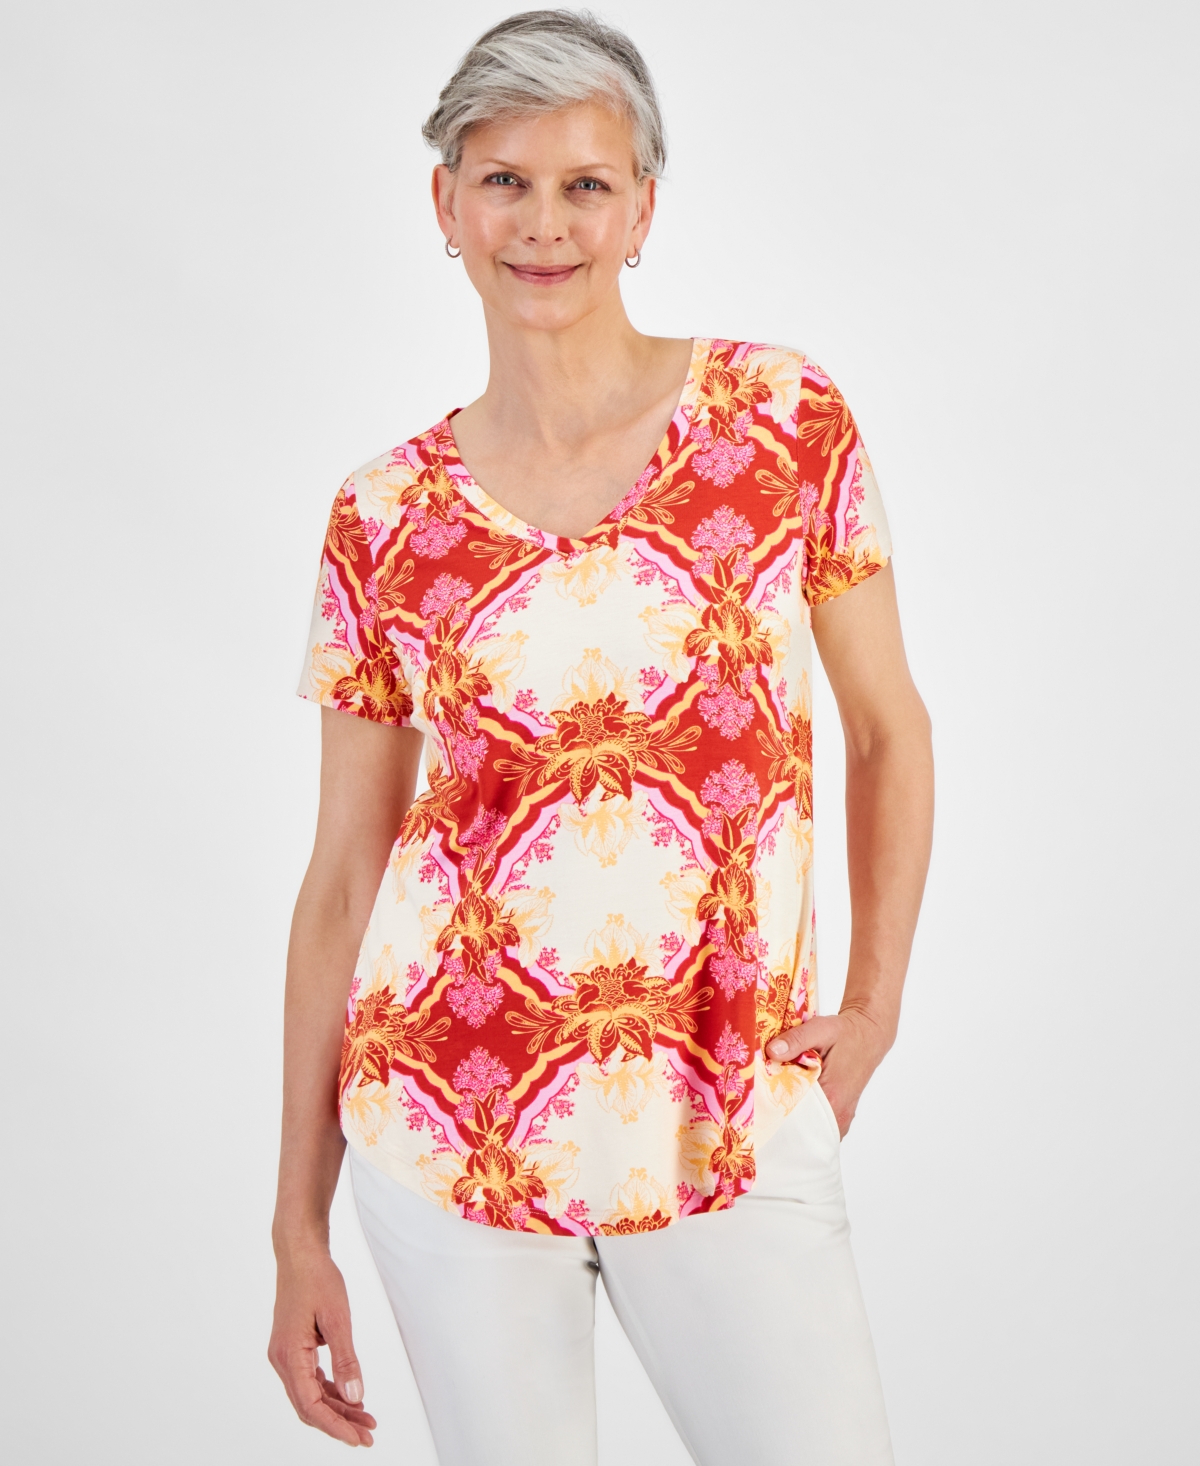 Petite Lace Lush Scoop-Neck Top, Created for Macy's - Pumpkin Seed Combo